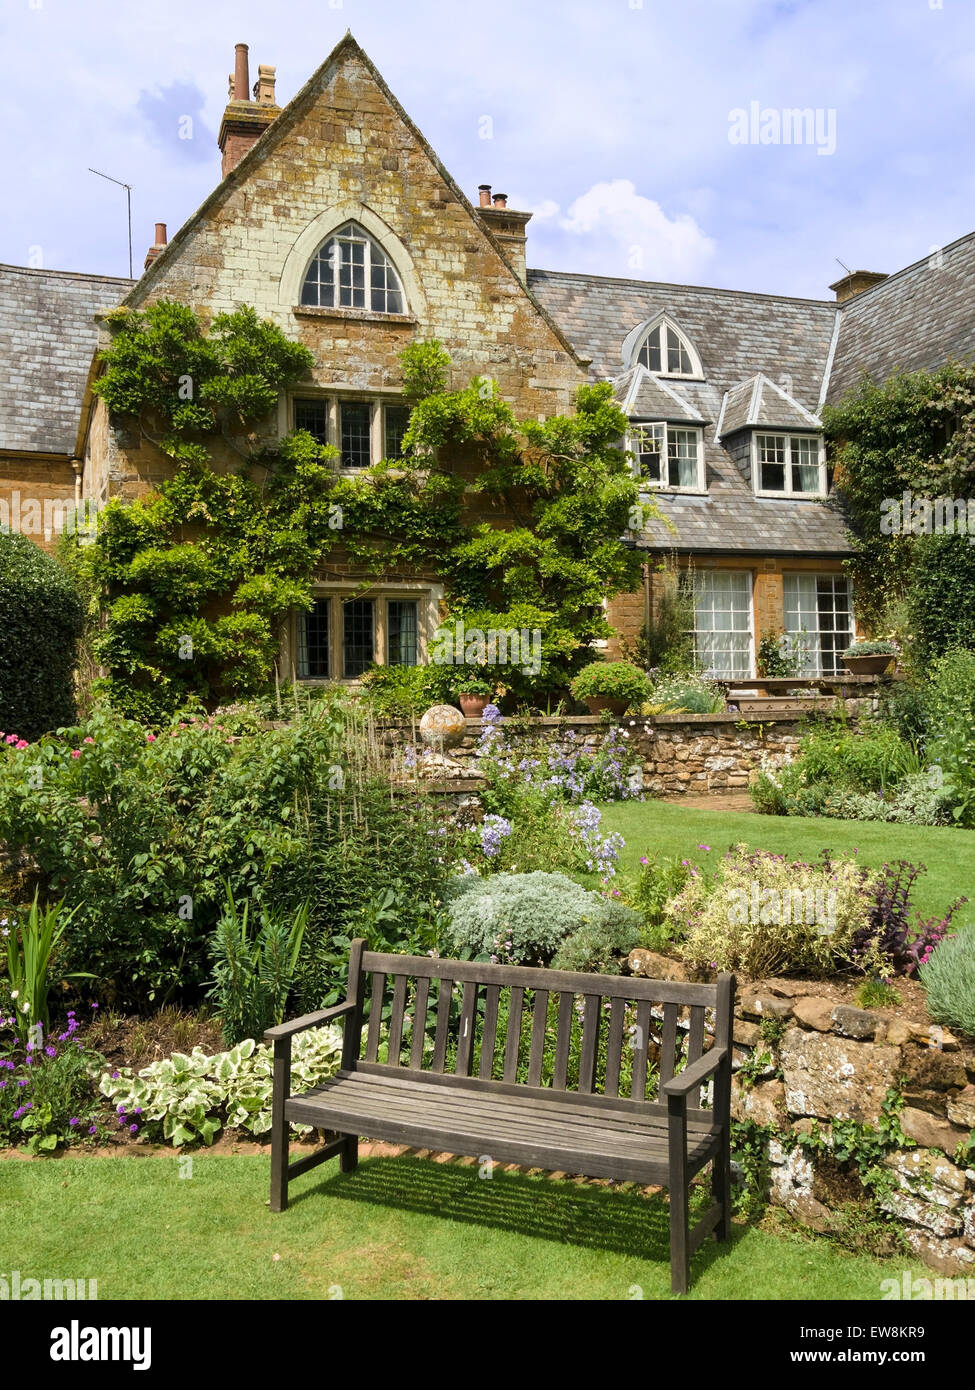 Coton Manor House and gardens, Coton, Northamptonshire, England, UK. Banque D'Images